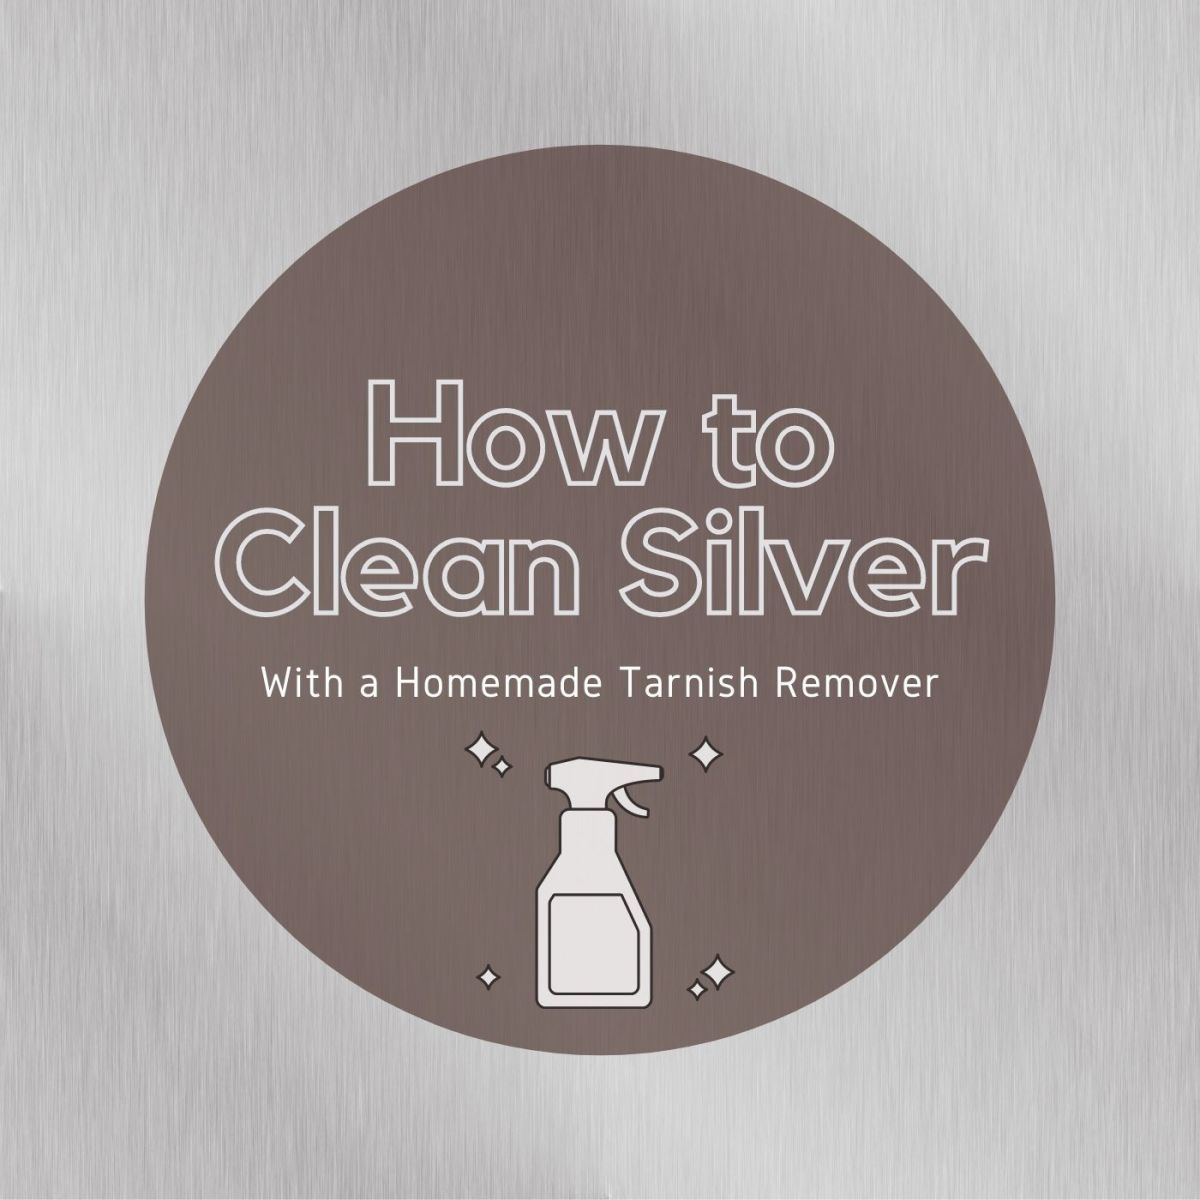 How to Clean Silver With Homemade Tarnish Remover